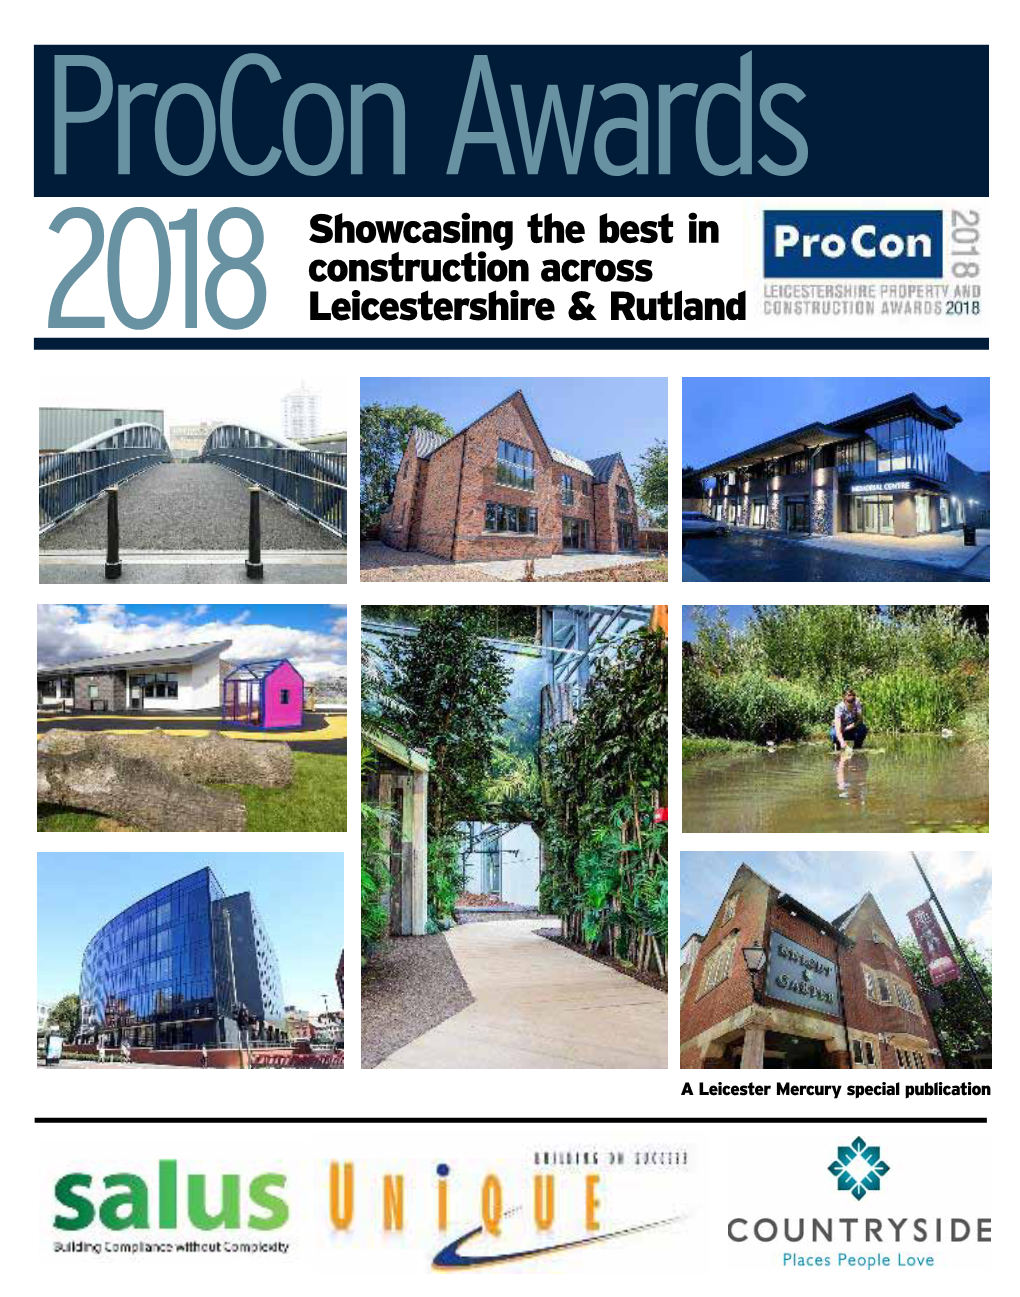 2018 Showcasing the Best in Construction Across Leicestershire & Rutland